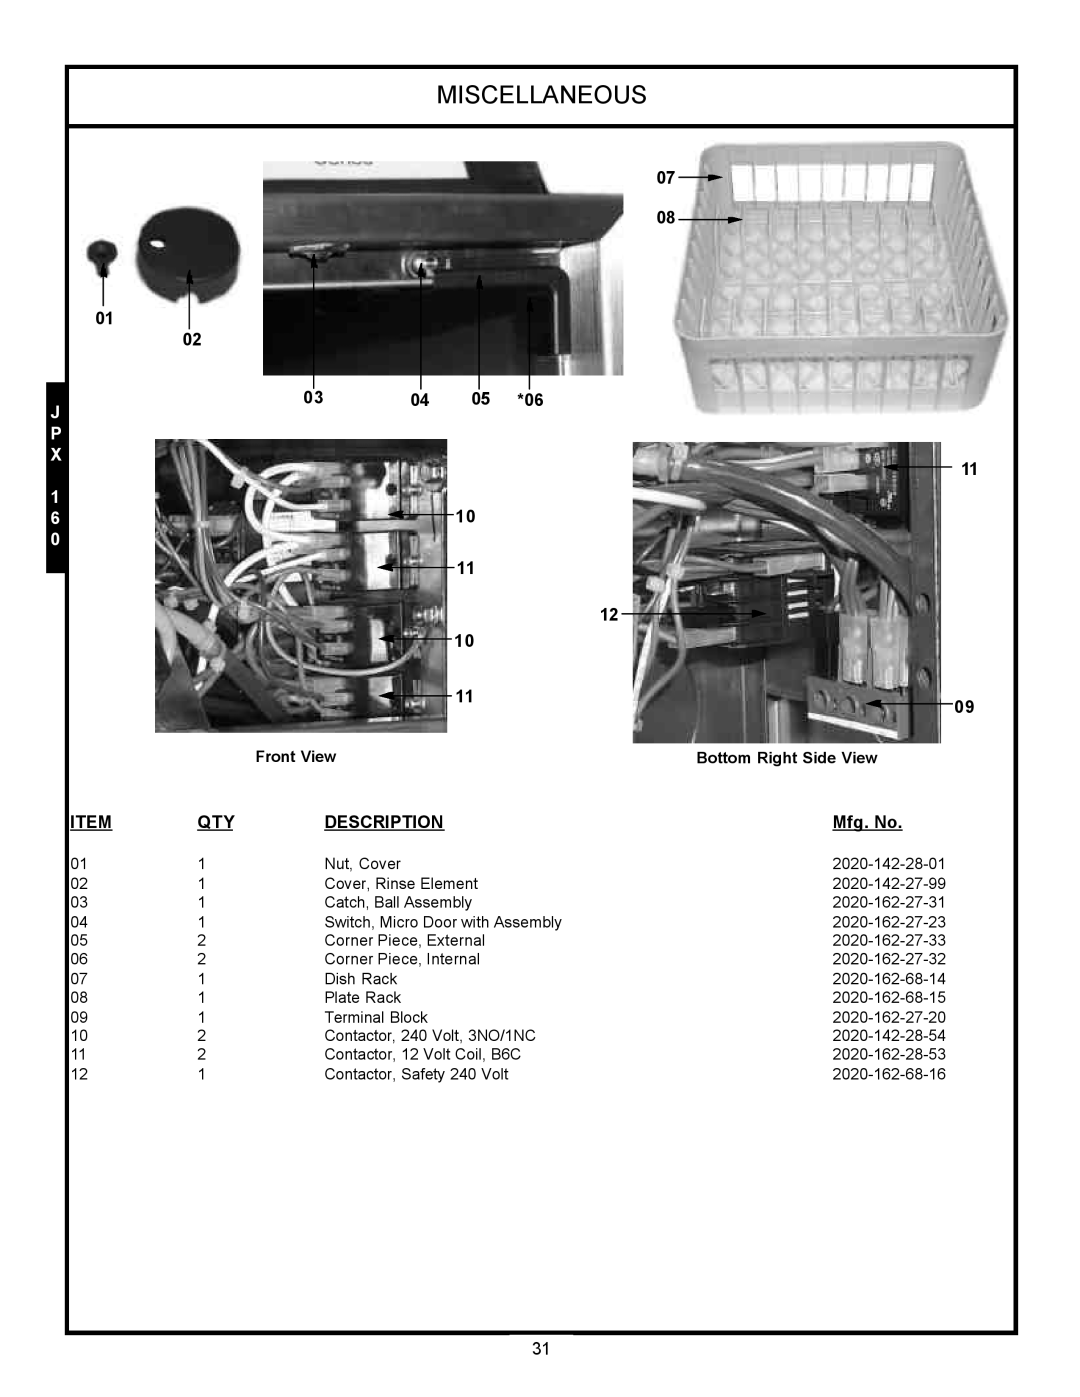 Jackson JPX-160, JPX-200, jpx-140 service manual Miscellaneous, Description, Mfg. No, Front View, Bottom Right Side View 